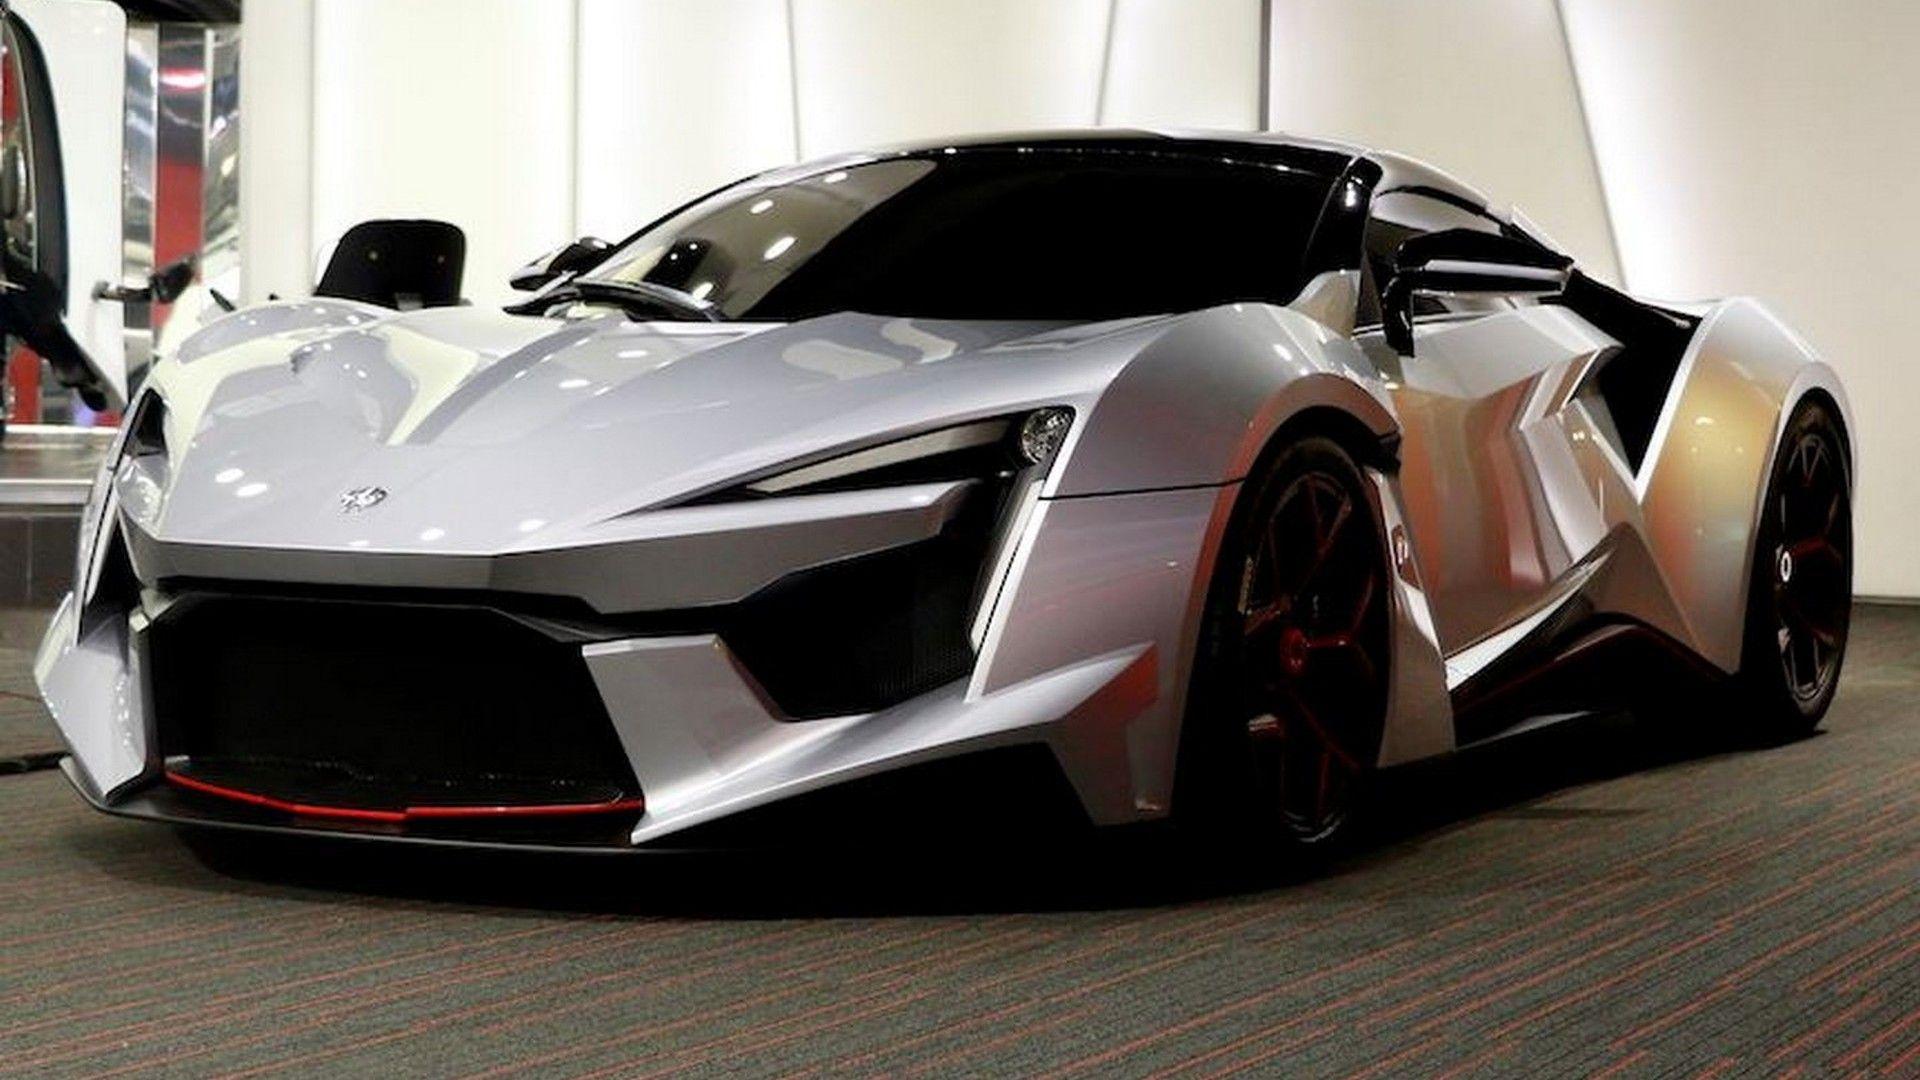 A closer look at the Fenyr SuperSport in live pics